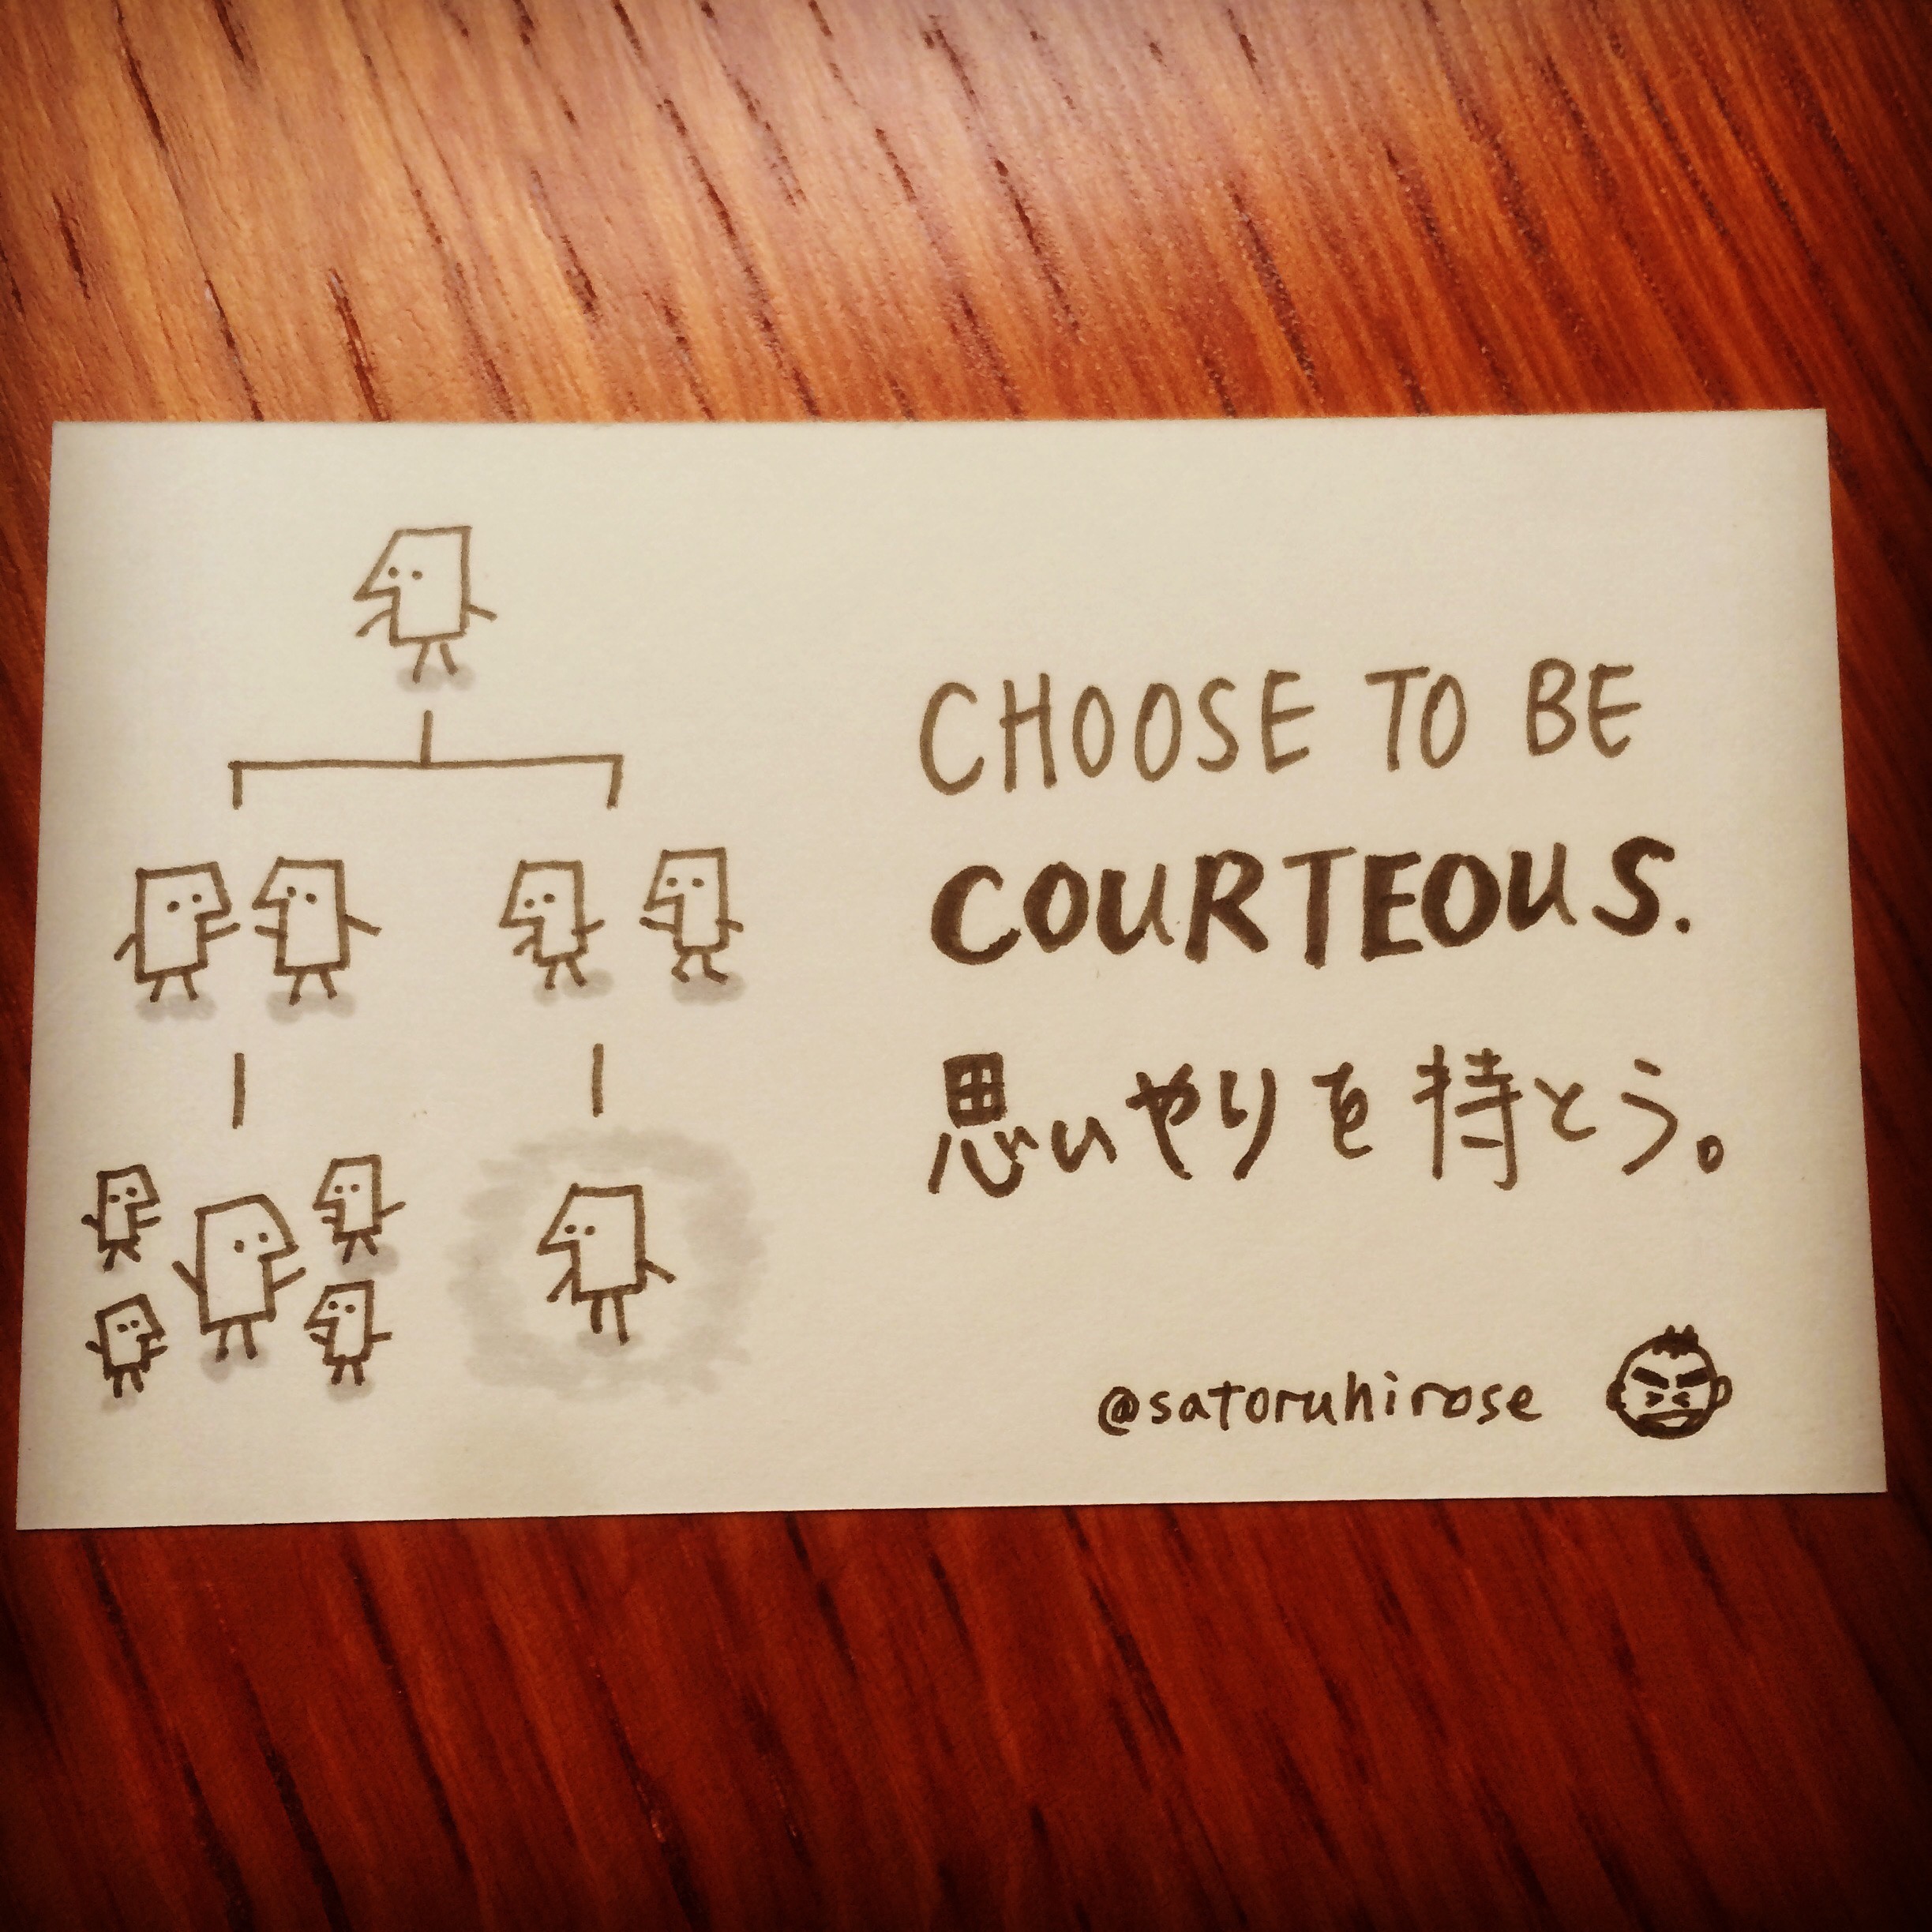 Choose to be courteous.